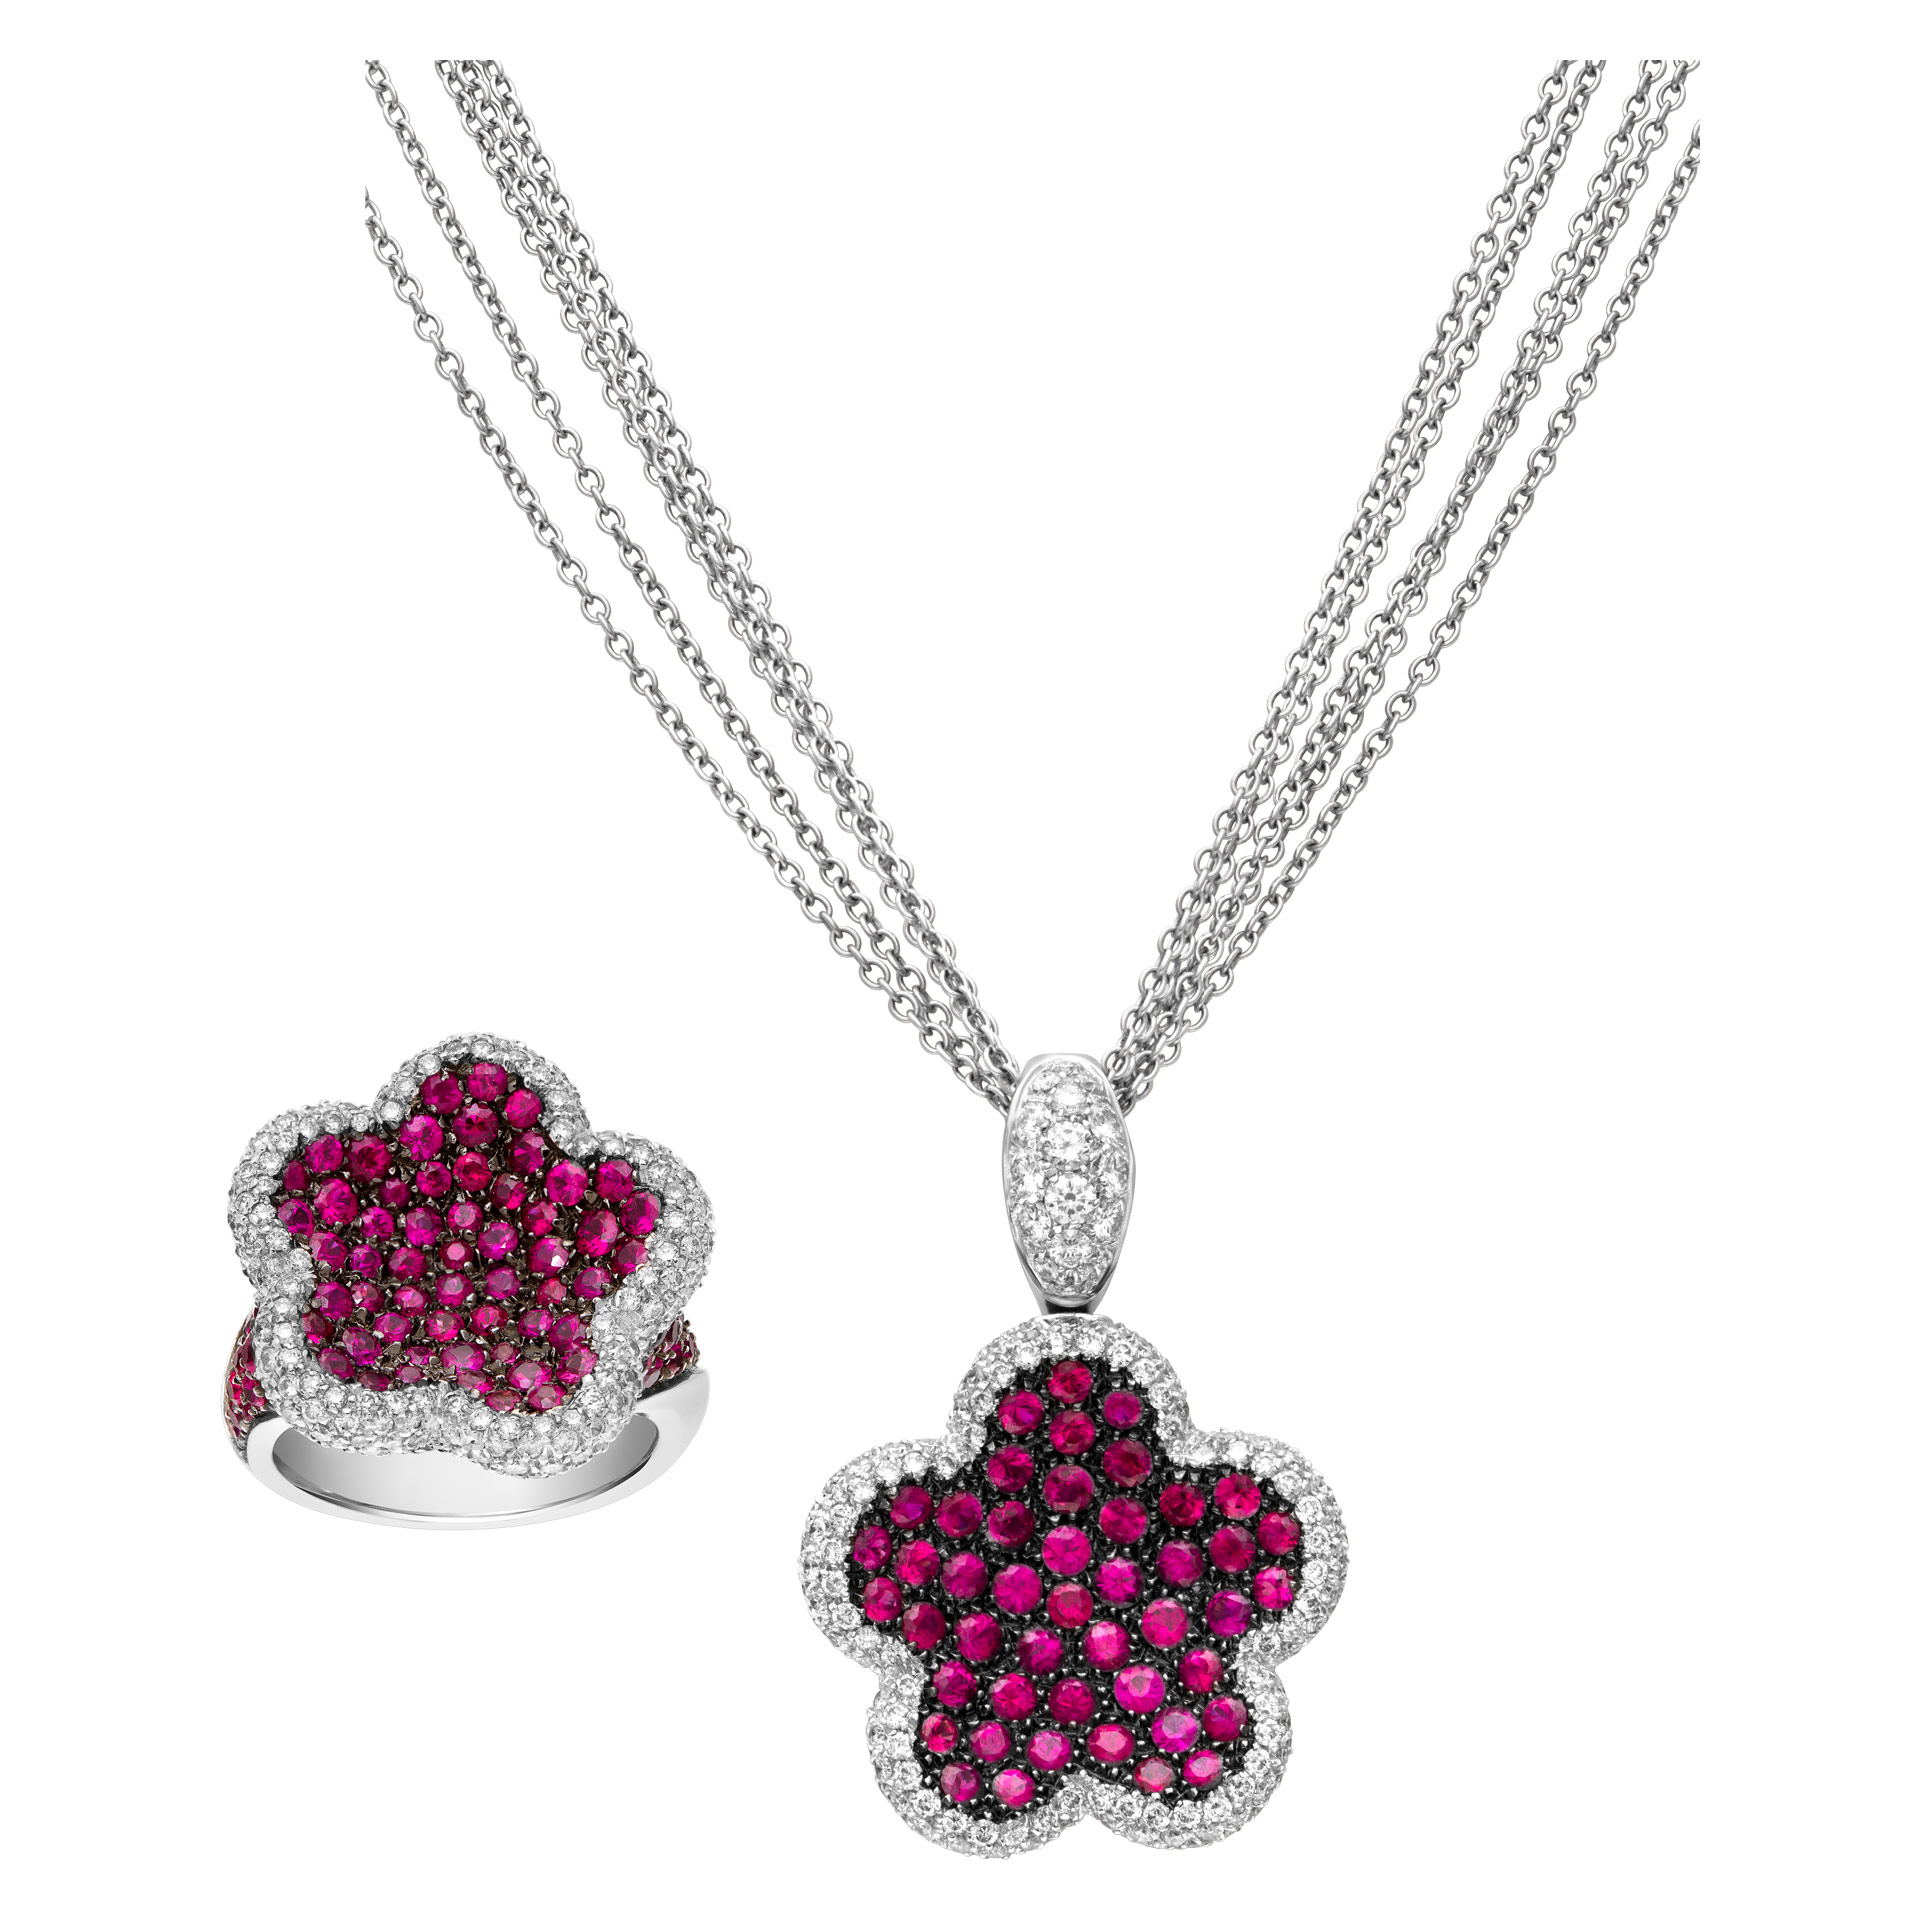 Pink sapphire & diamond 2 pieces pendant/necklace & ring set in 18k white gold